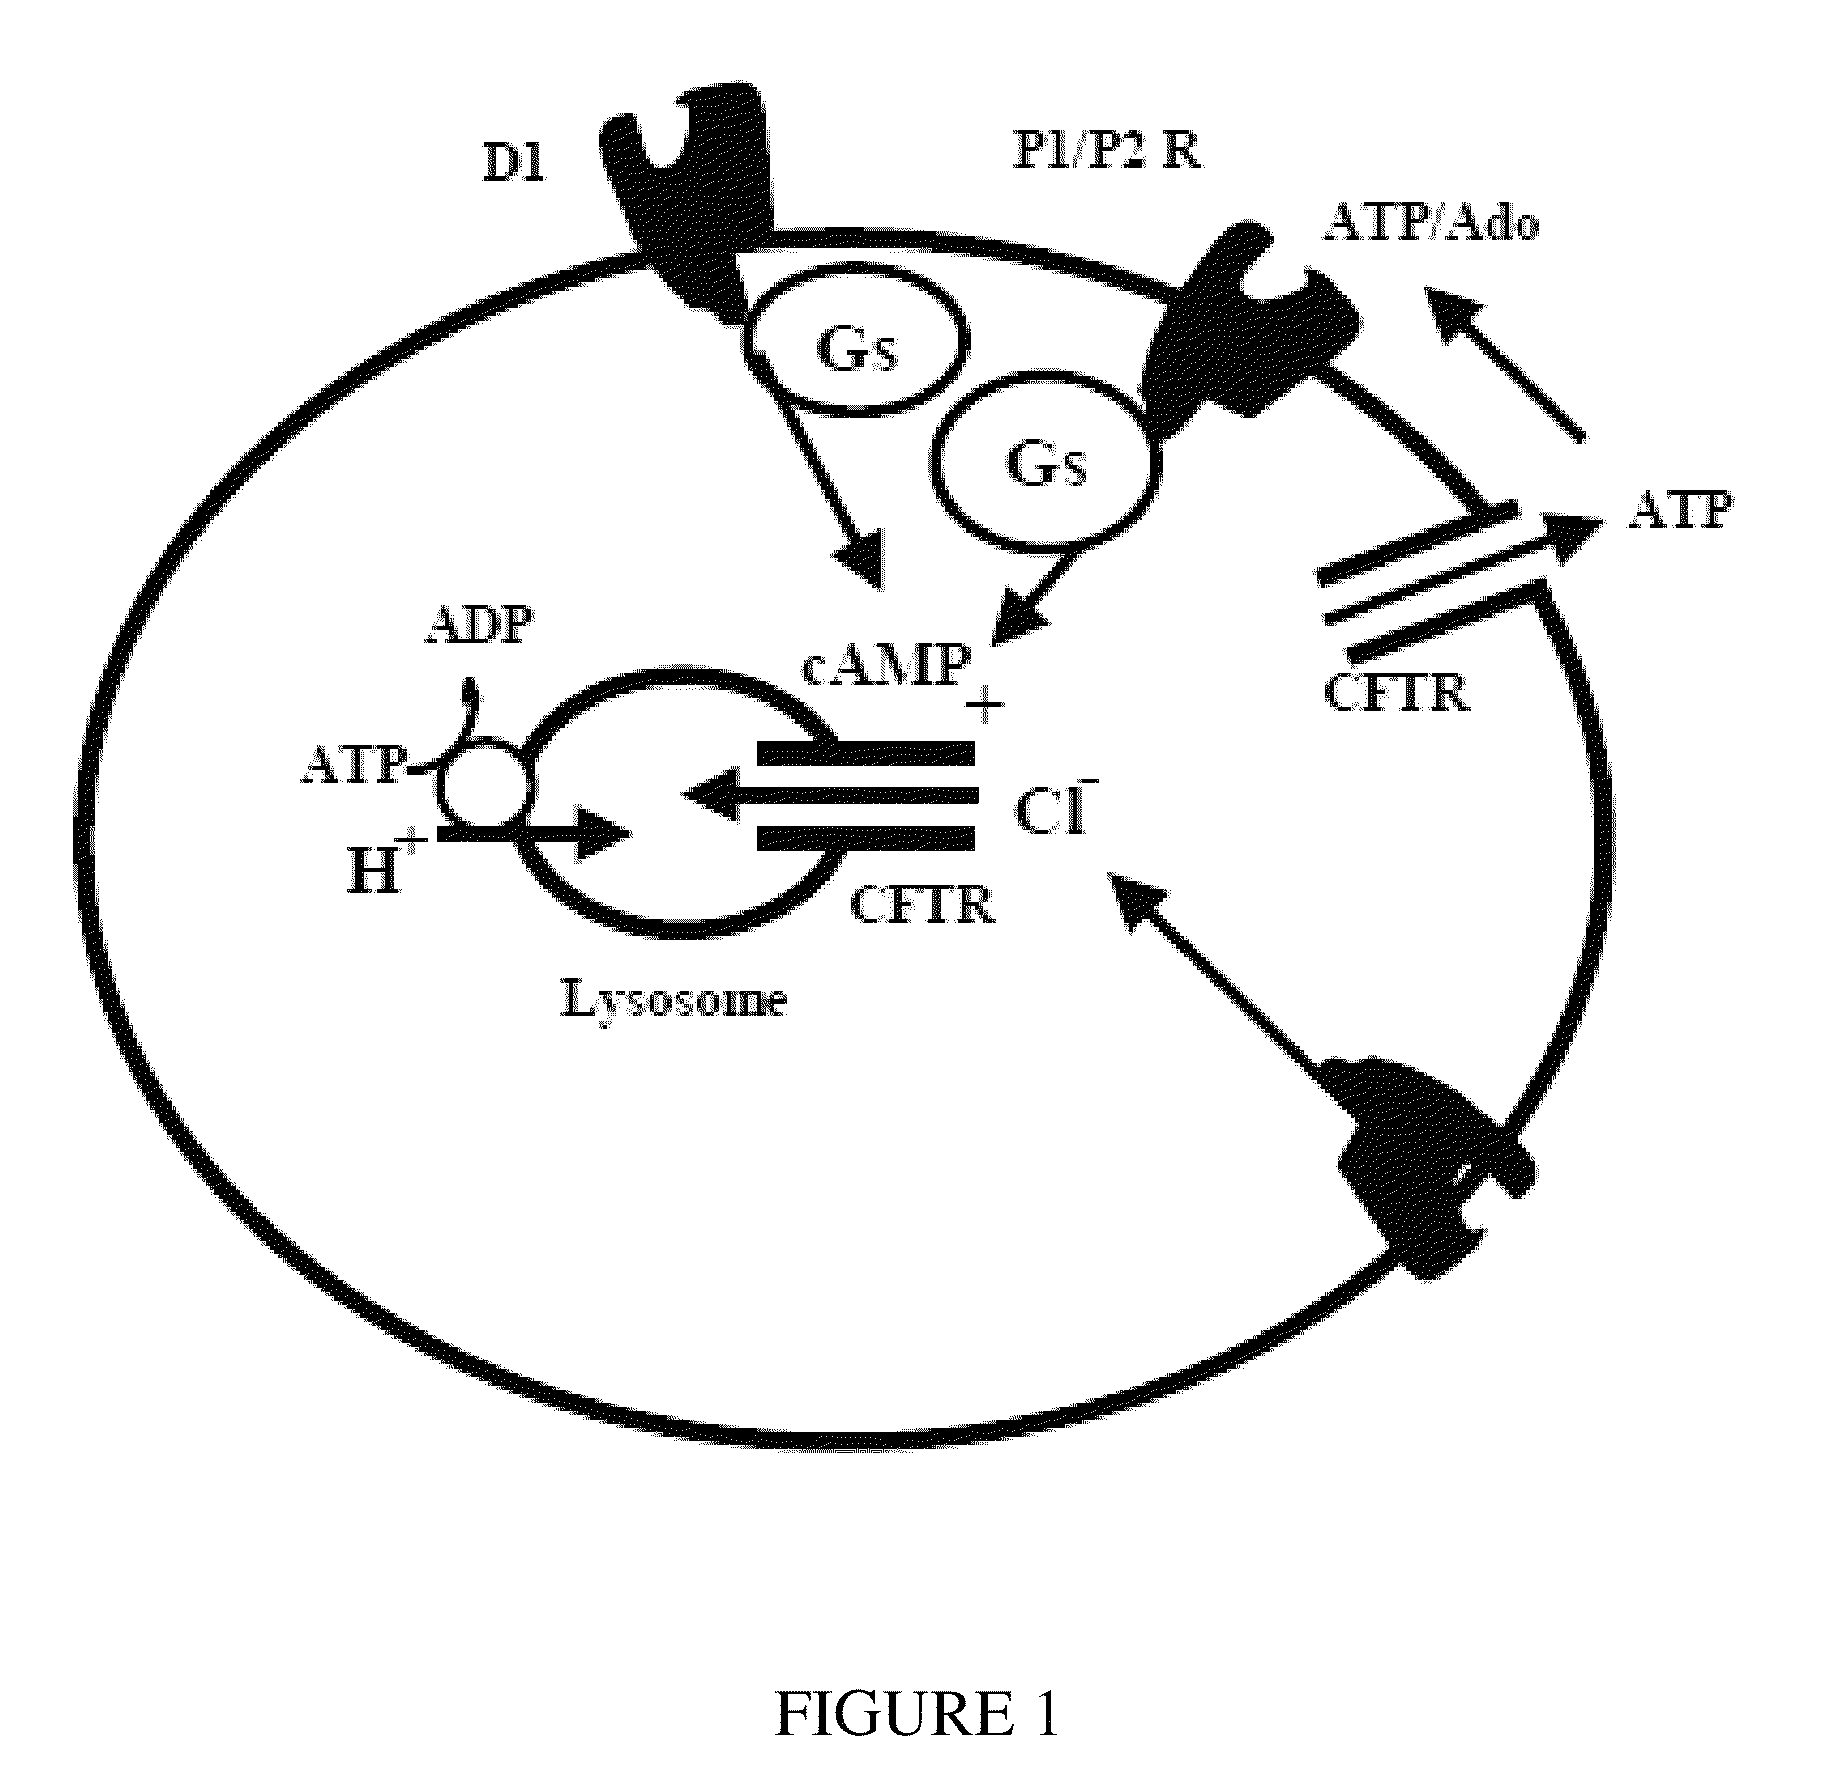 Method for treatment of macular degeneration by modulating P2Y12 or P2X7 receptors